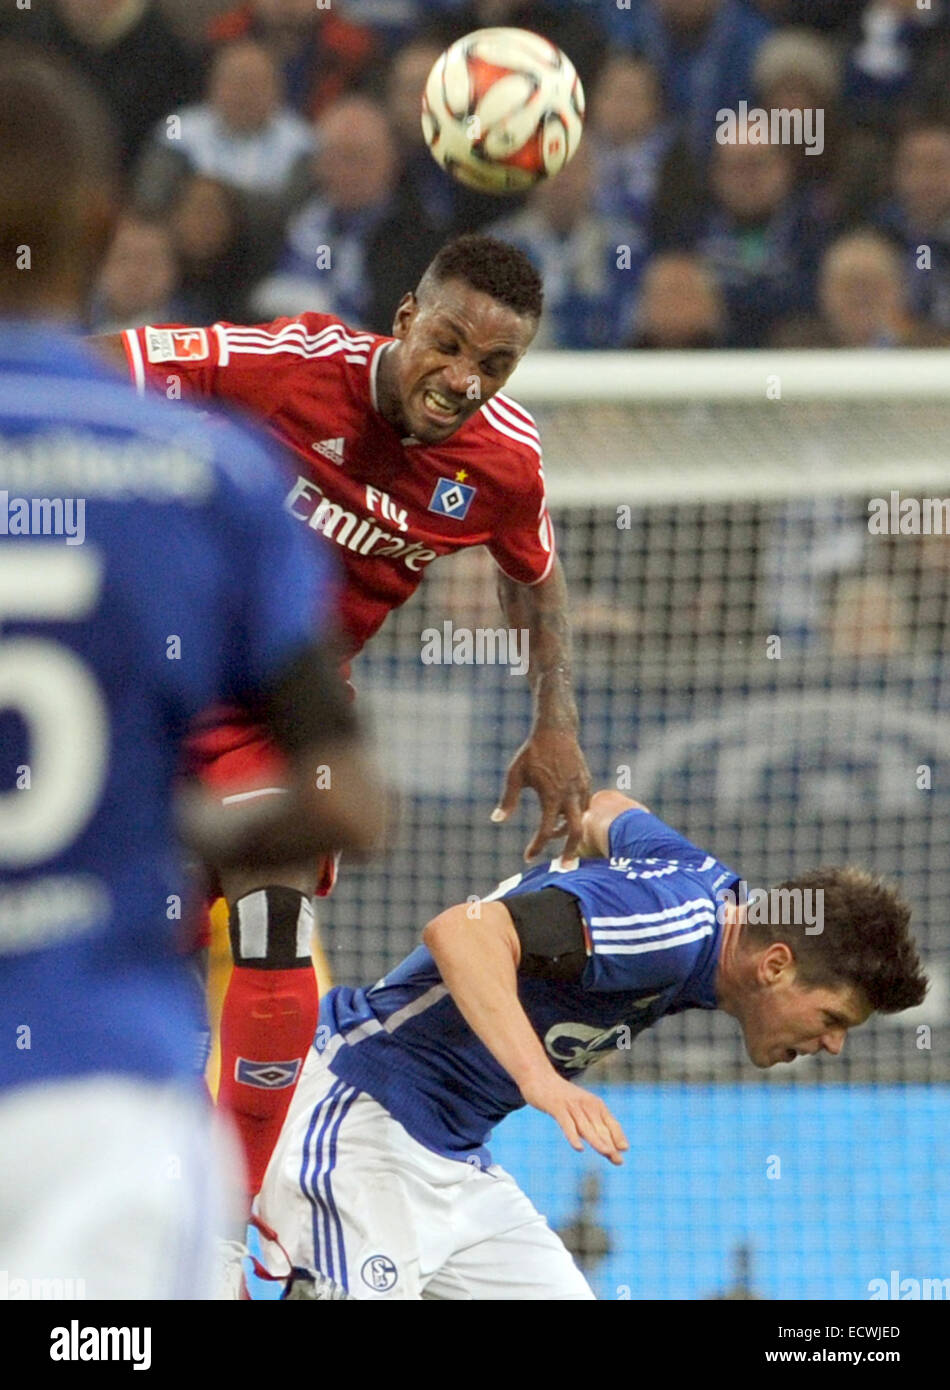 Gelsenkirchen, Germany. 20th Dec, 2014. Schalke's Klaas-Jan Huntelaar (R) and Hamburg's Cleber (TOP) vie for the ball during the Bundesliga soccer match between FC Schalke 04 and Hamburger SV at Veltins arena in Gelsenkirchen, Germany, 20 December 2014. Photo: Caroline Seidel/dpa (ATTENTION: Due to the accreditation guidelines, the DFL only permits the publication and utilisation of up to 15 pictures per match on the internet and in online media during the match.)/dpa/Alamy Live News Stock Photo